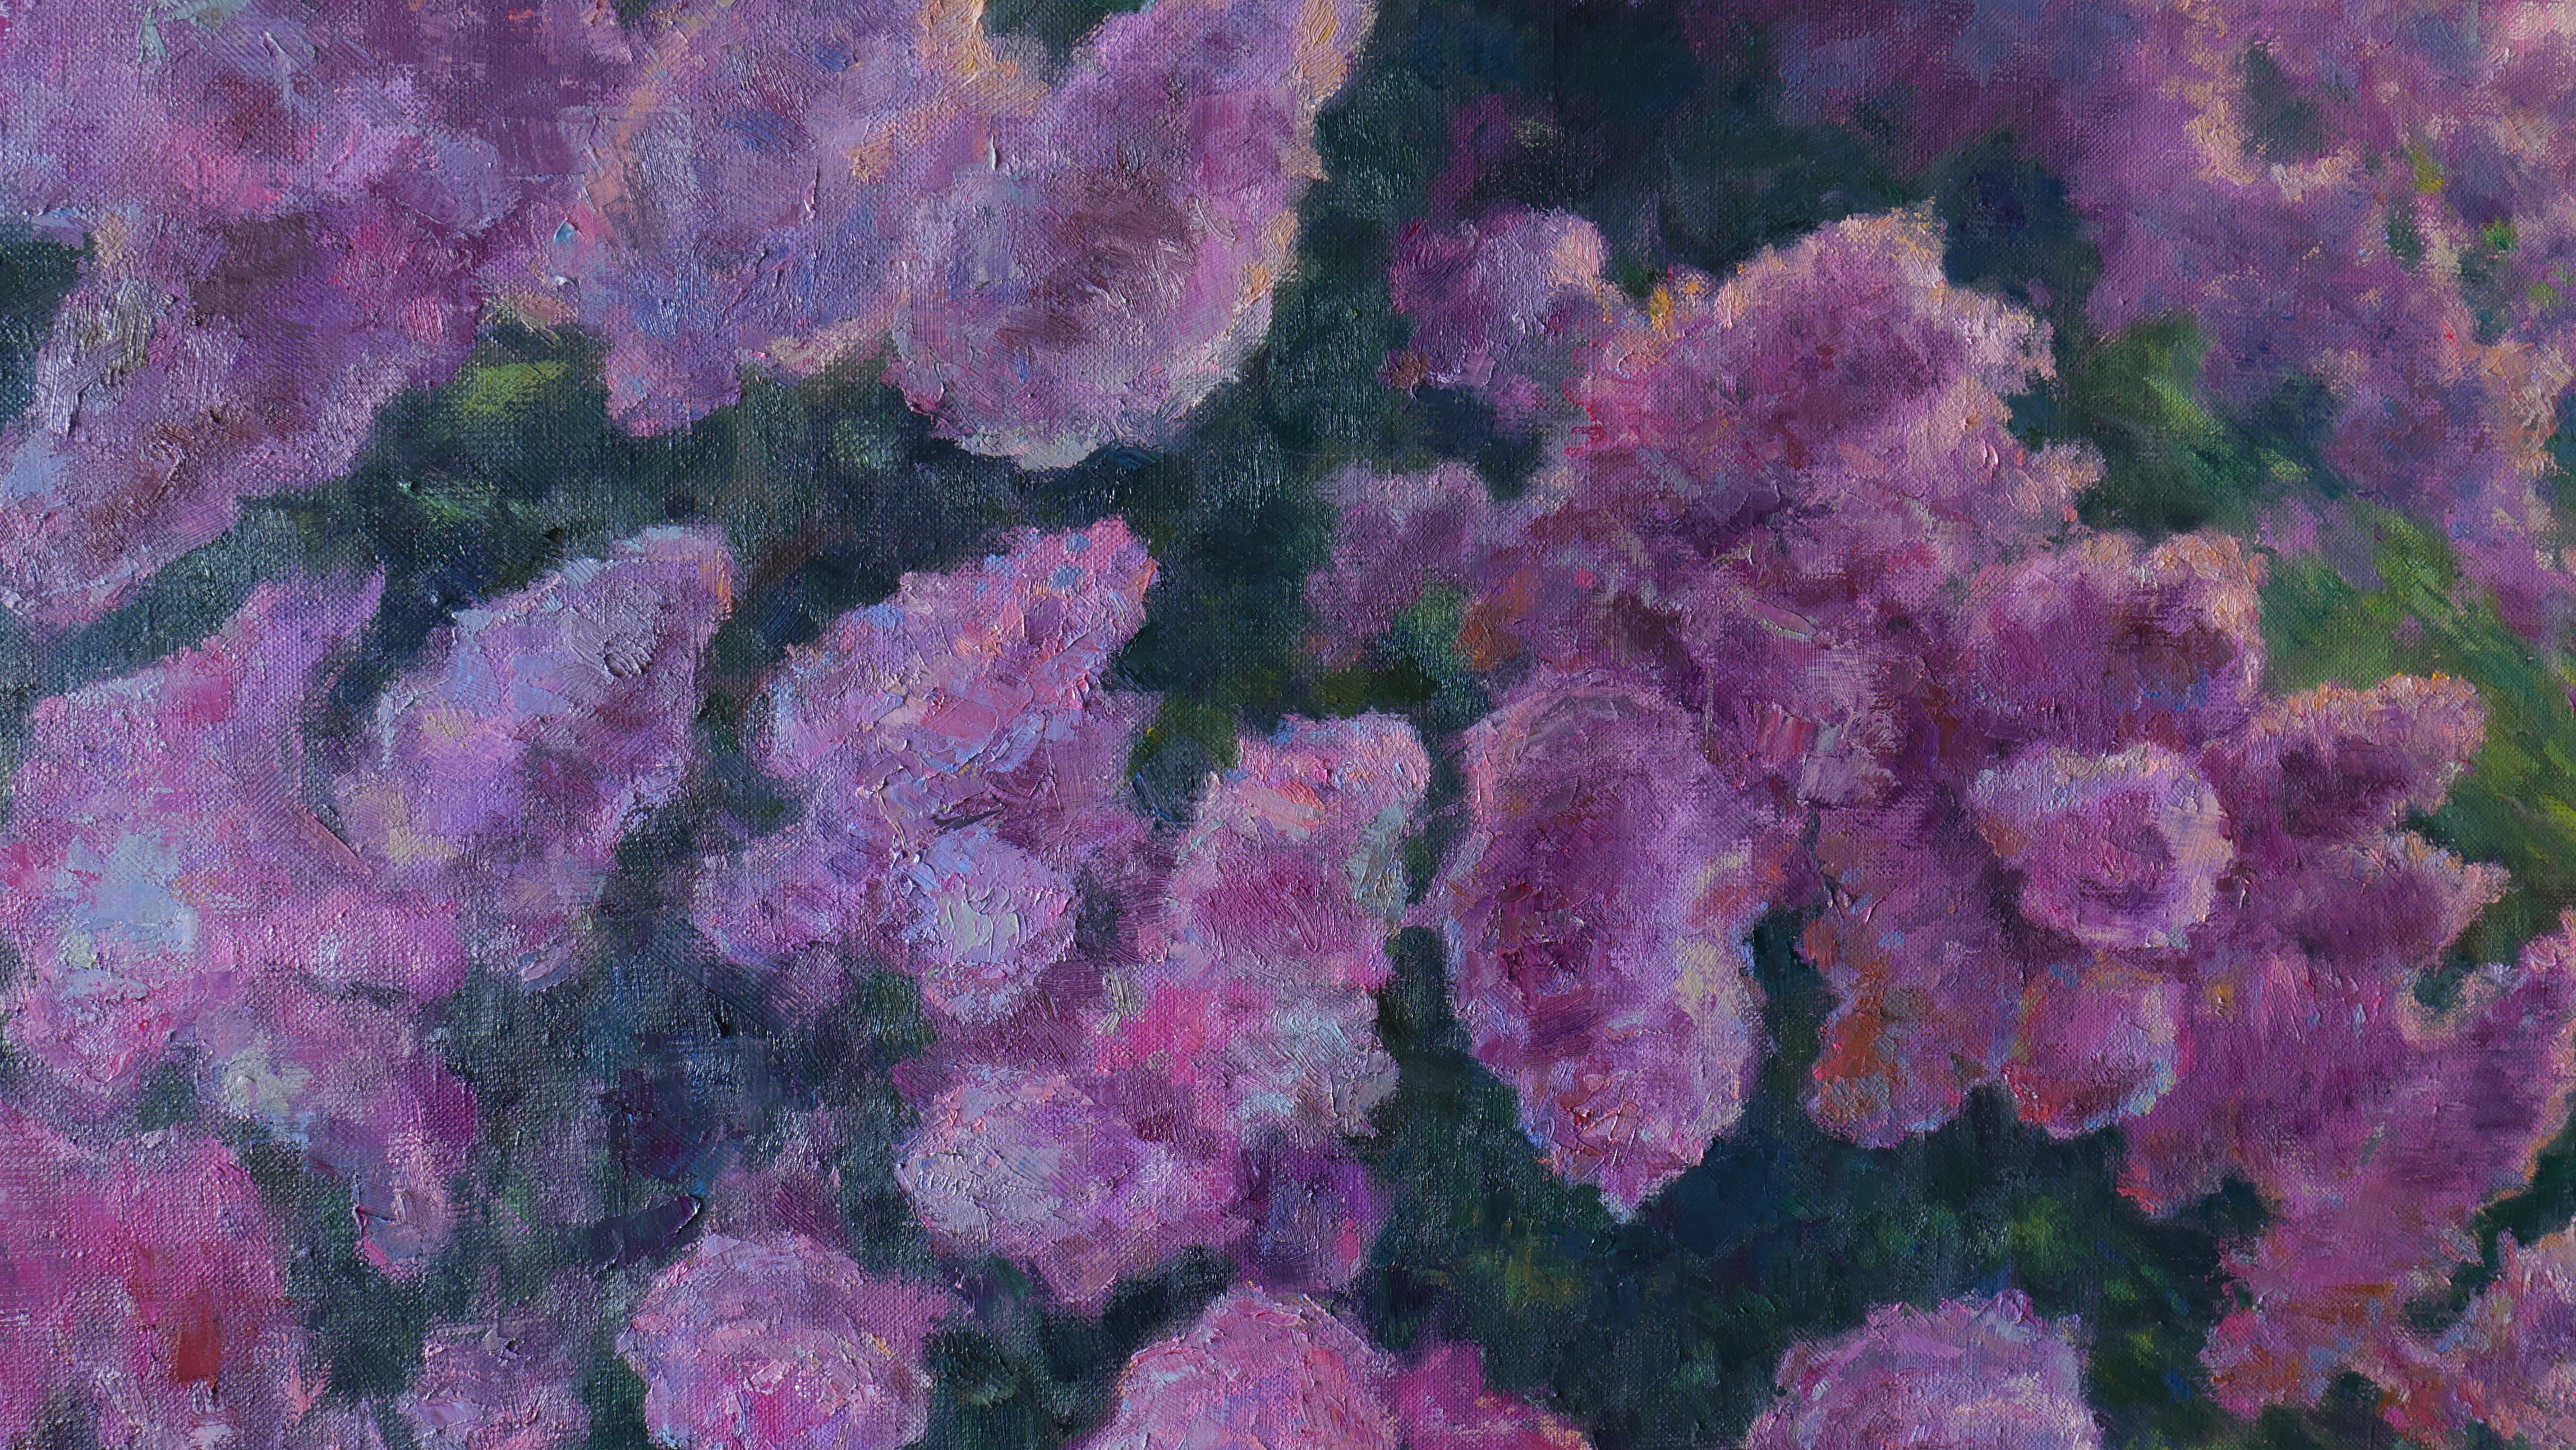 Lilacs Fading Into Light - sunny floral painting For Sale 4